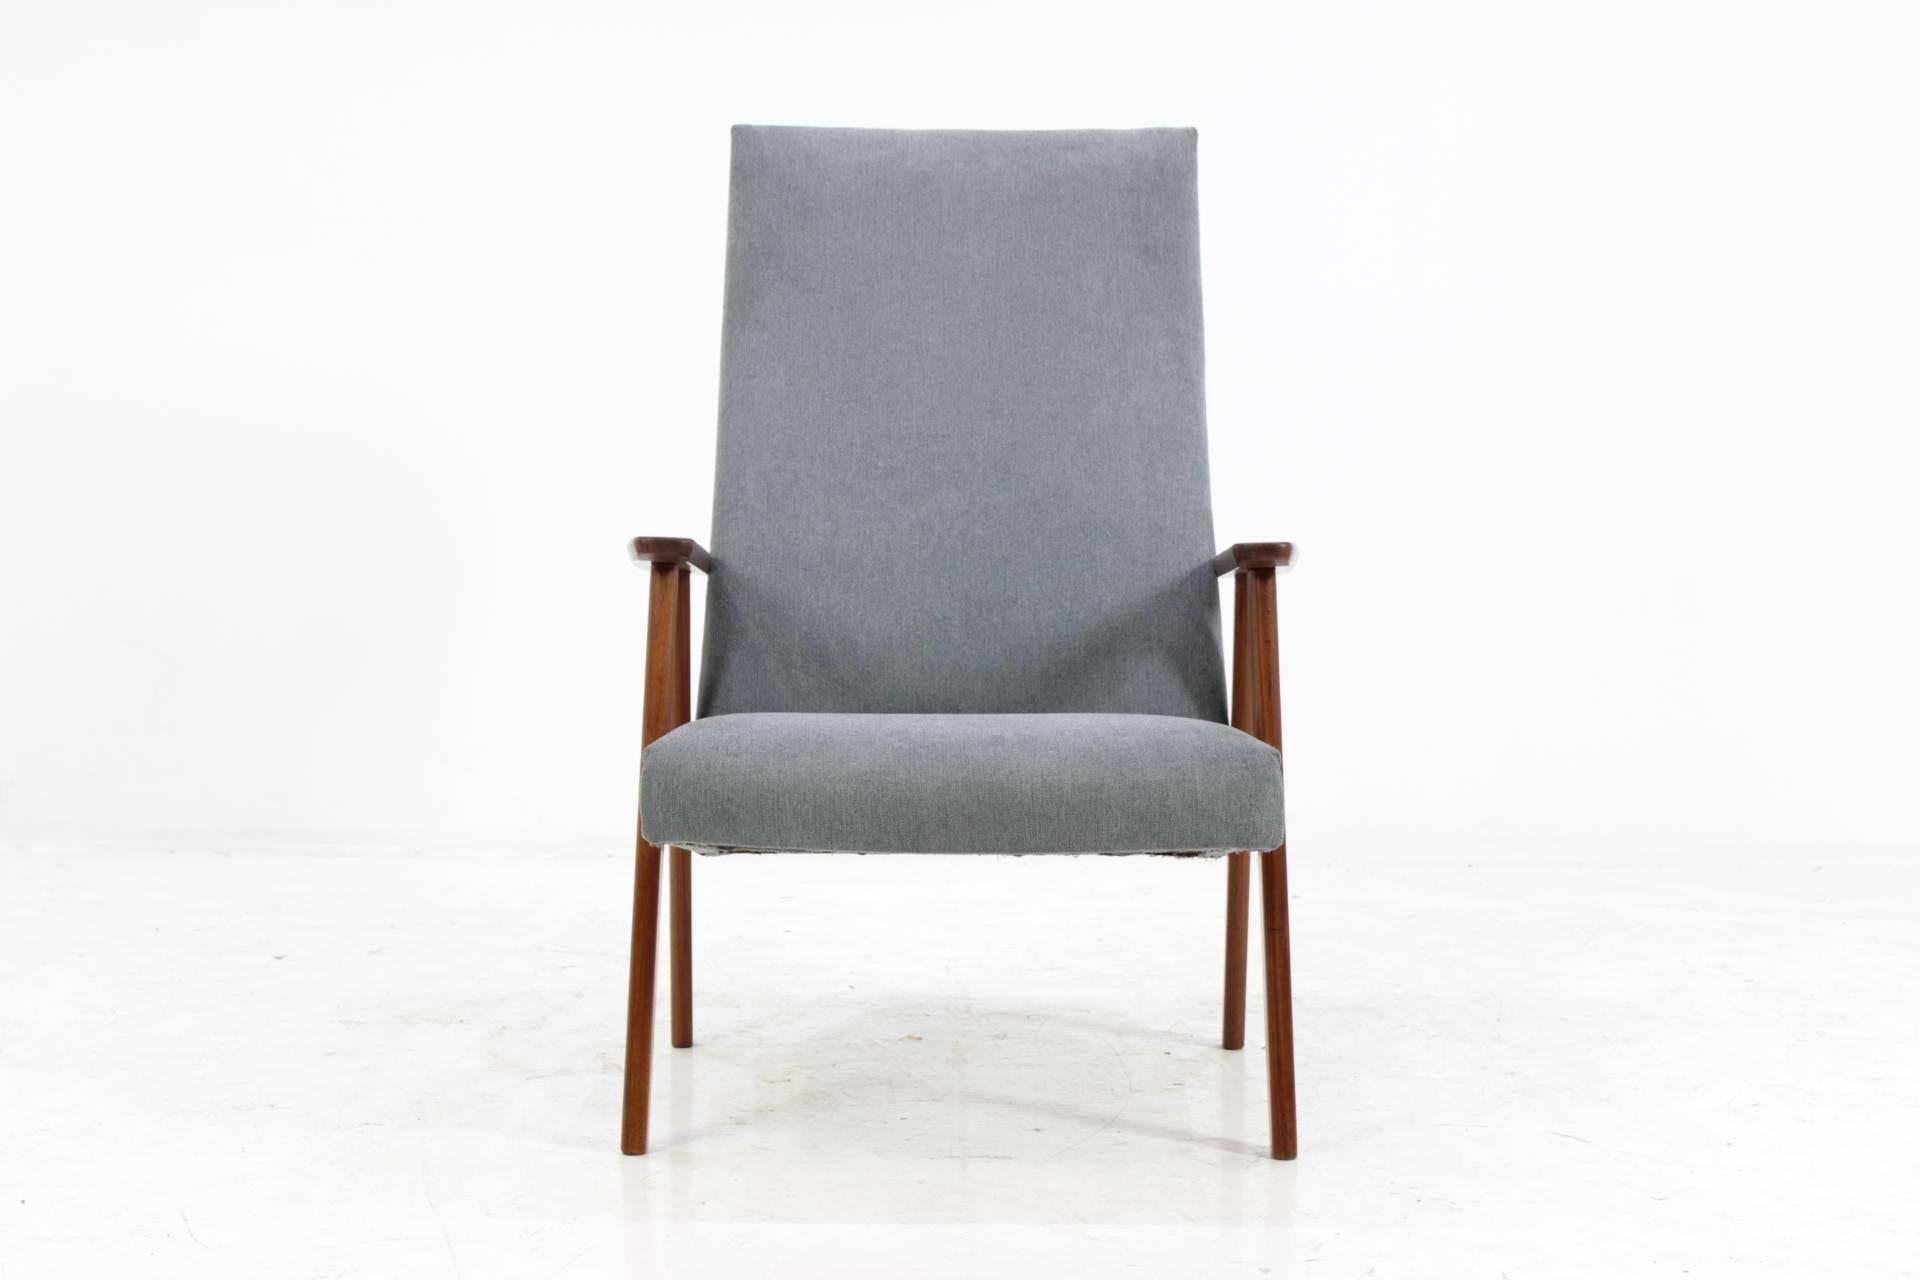 The chair features wooden teak frame and new fabric upholstery. Item was carefully refurbished.